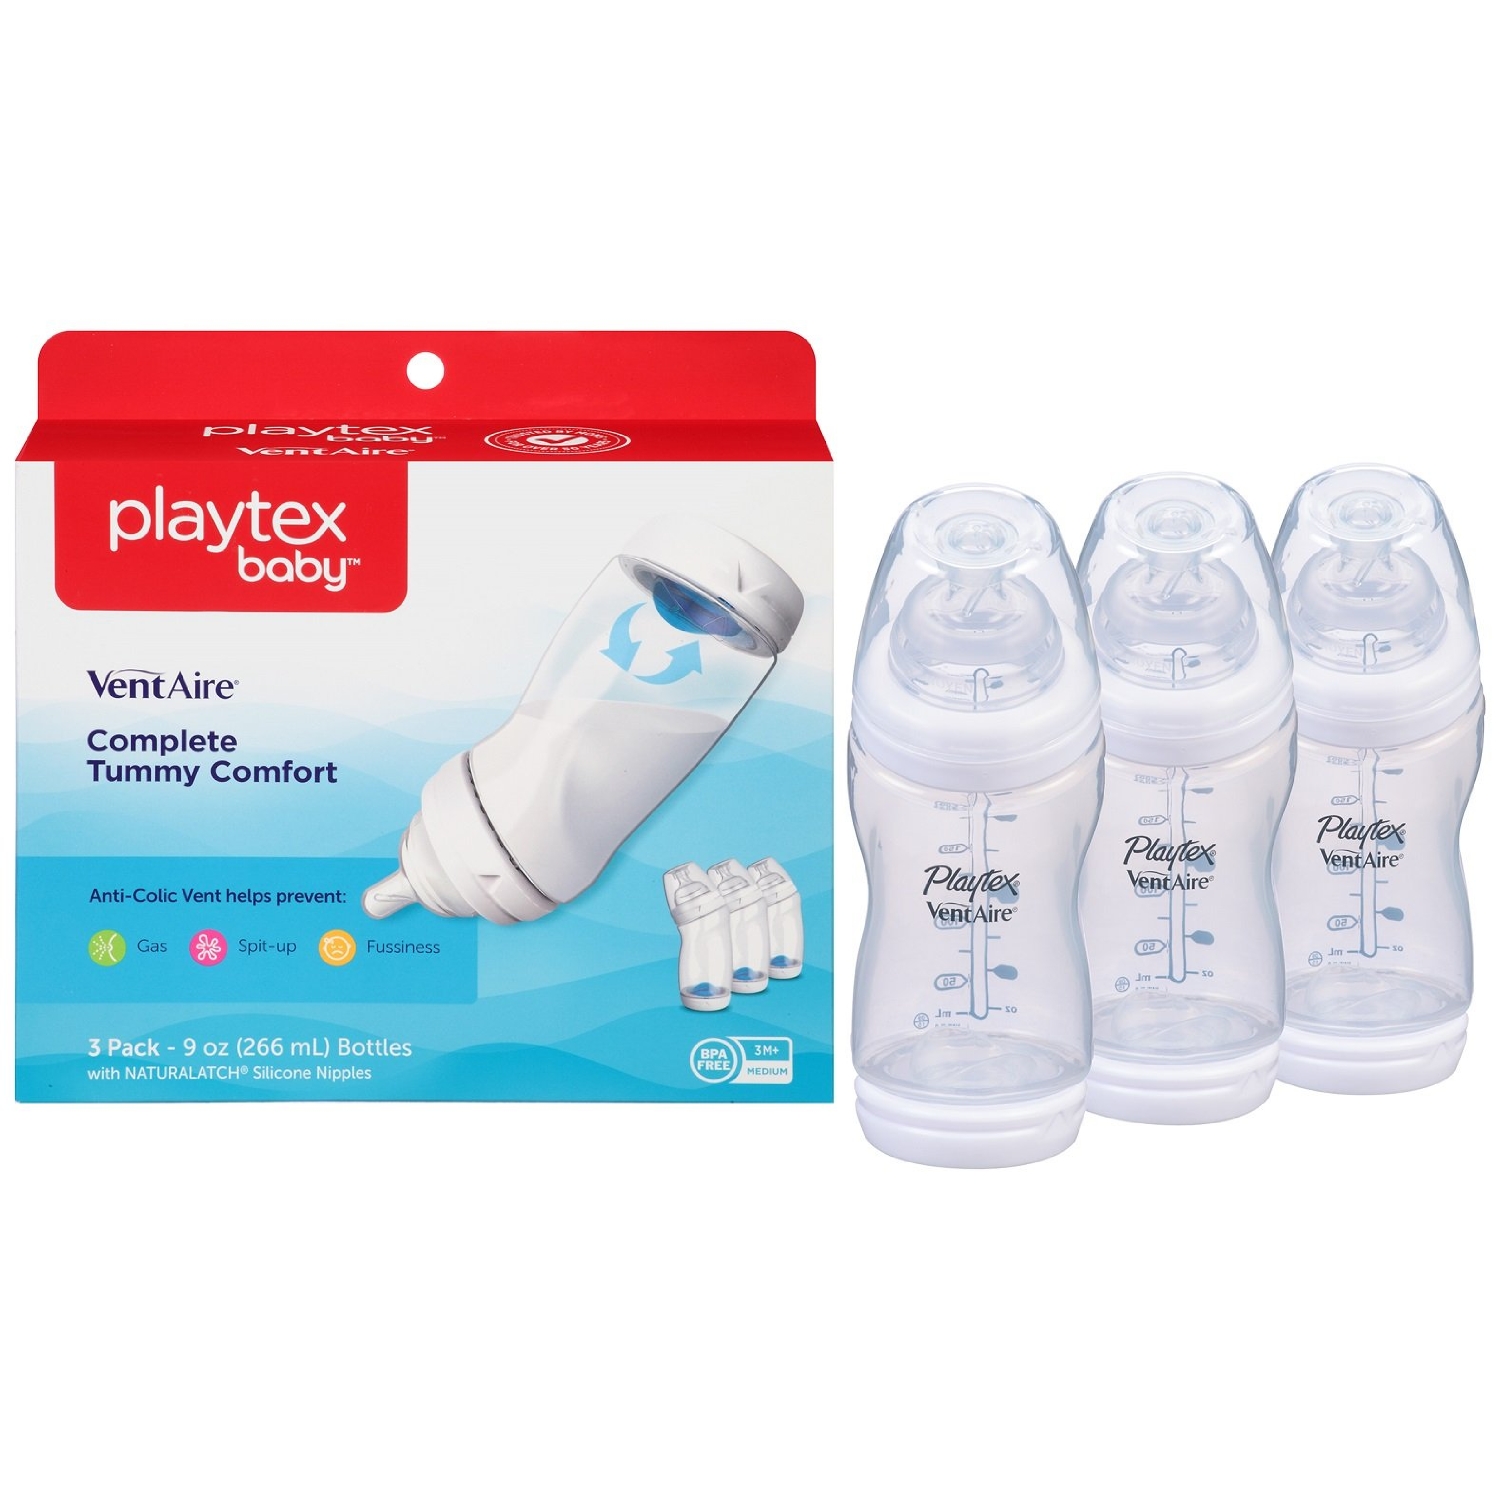 playtex baby ventaire anti colic baby bottle, best baby bottles, baby bottles, plastic baby bottles, playtex baby bottles, anti-colic baby bottles